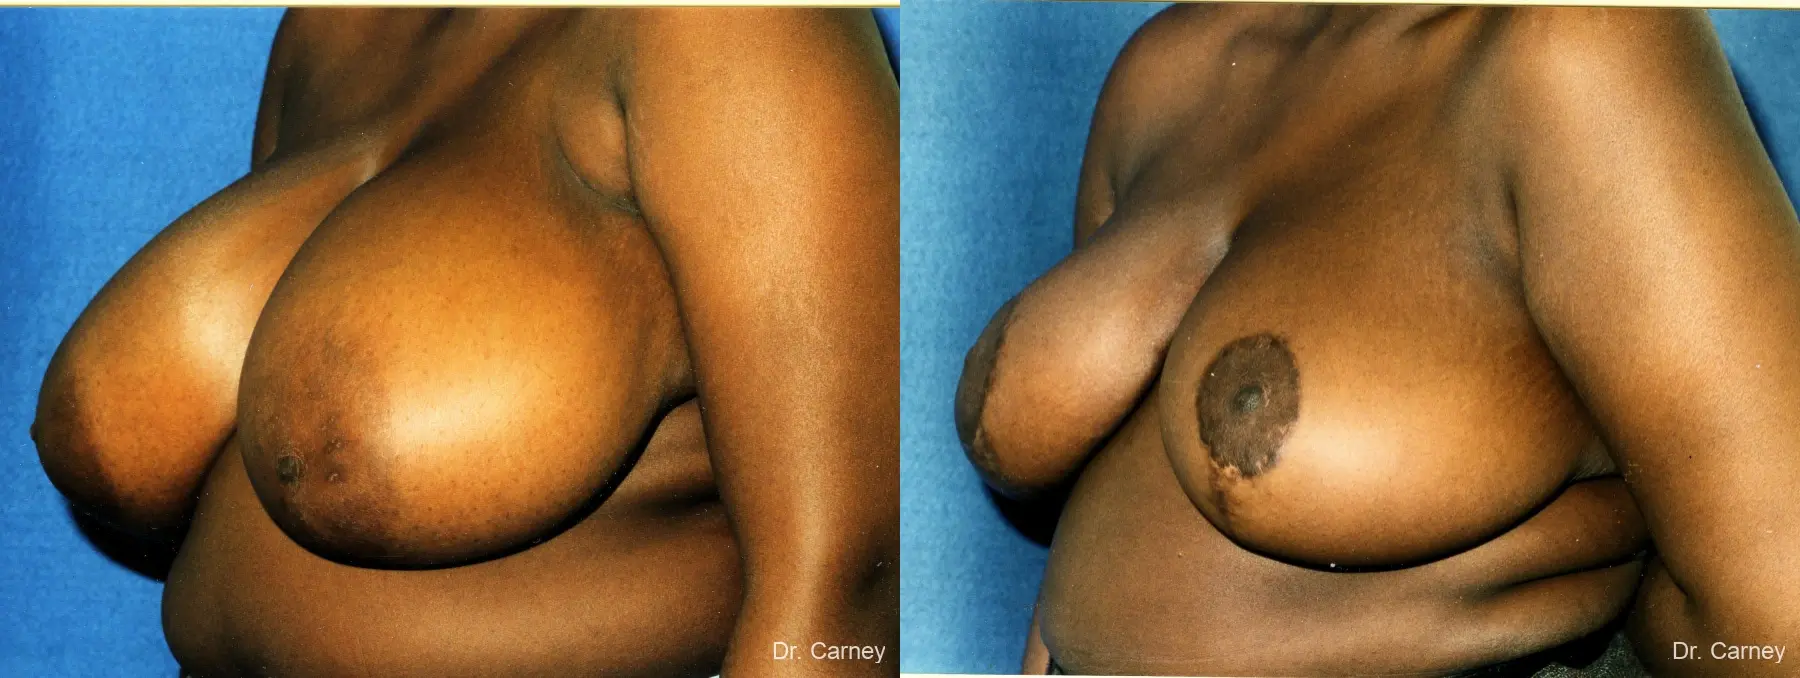 Virginia Beach Breast Reduction 1233 - Before and After 1